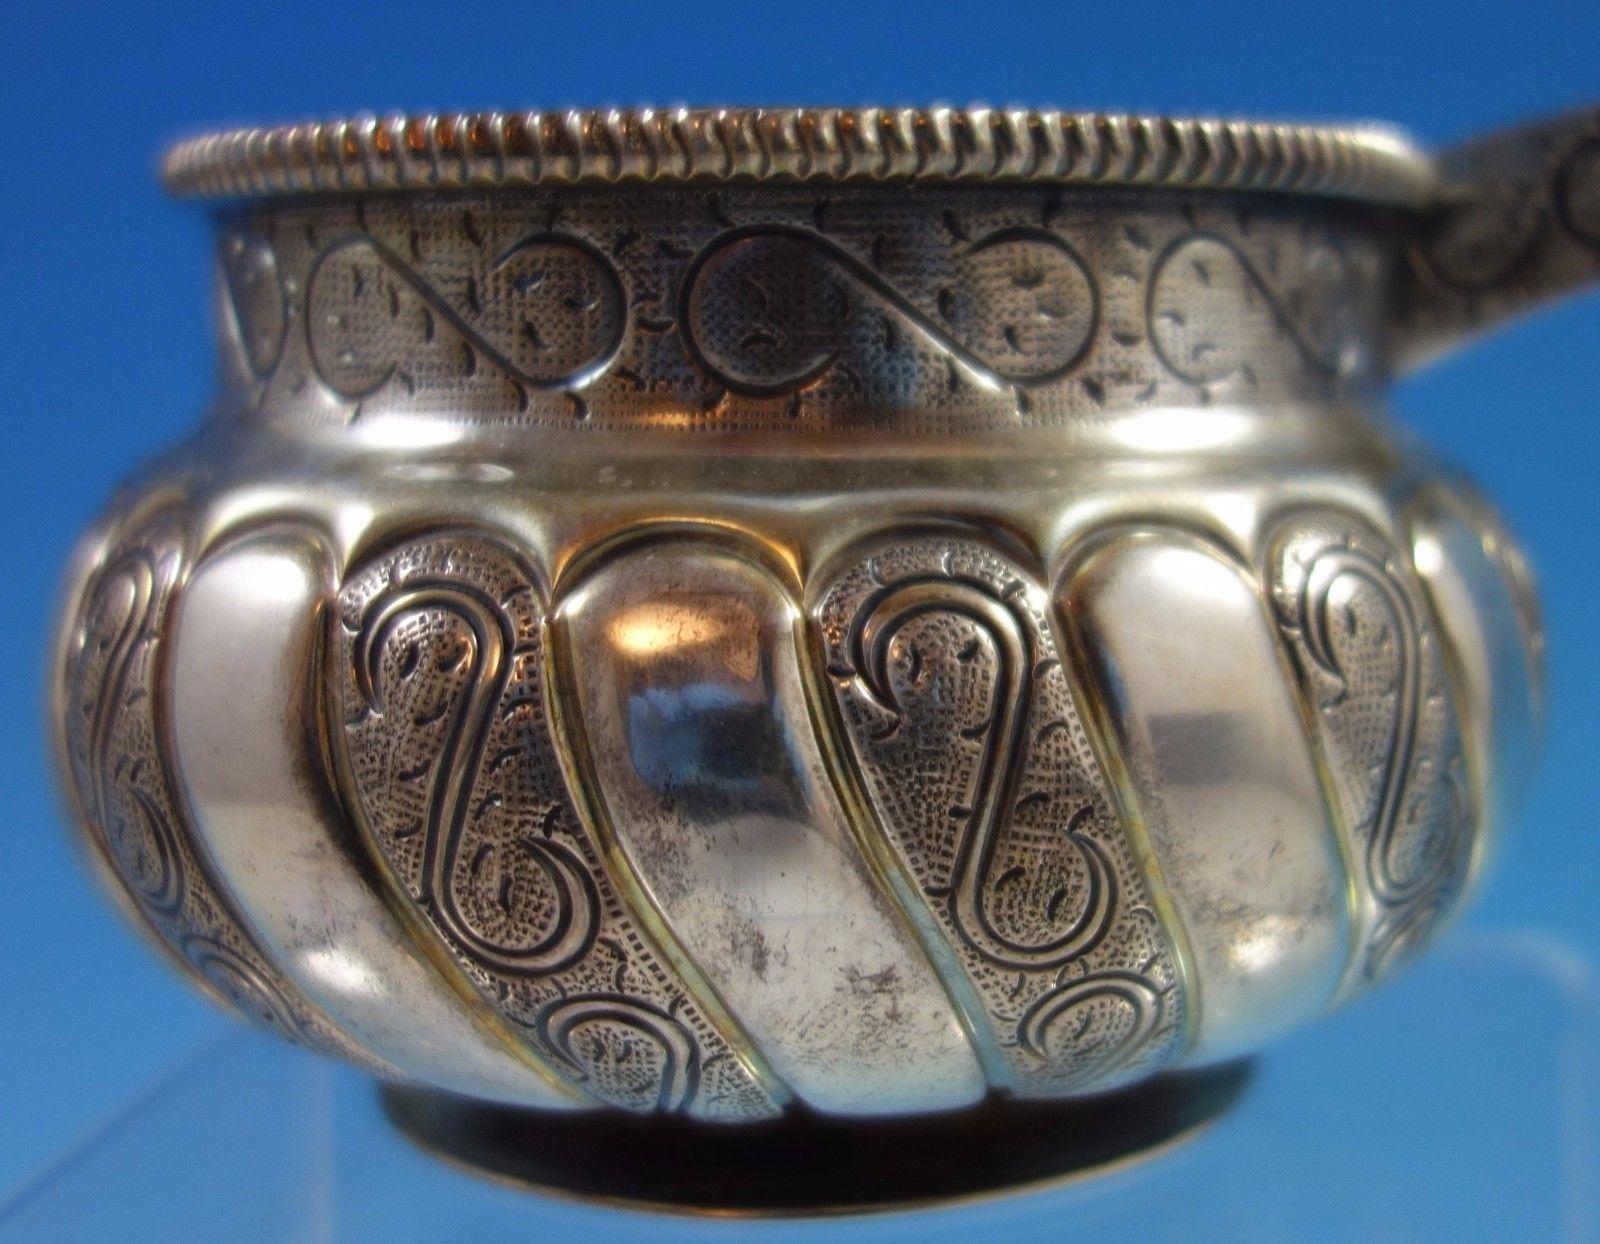 Tane Mexican sterling silver cossack kovsh bowl. The piece has Russian influence with gold wash. The bowl measures 3 tall and 5 1/4 wide, and it weighs 11.5 ozt. It is not monogrammed and is in excellent condition. Extraordinary! 

 